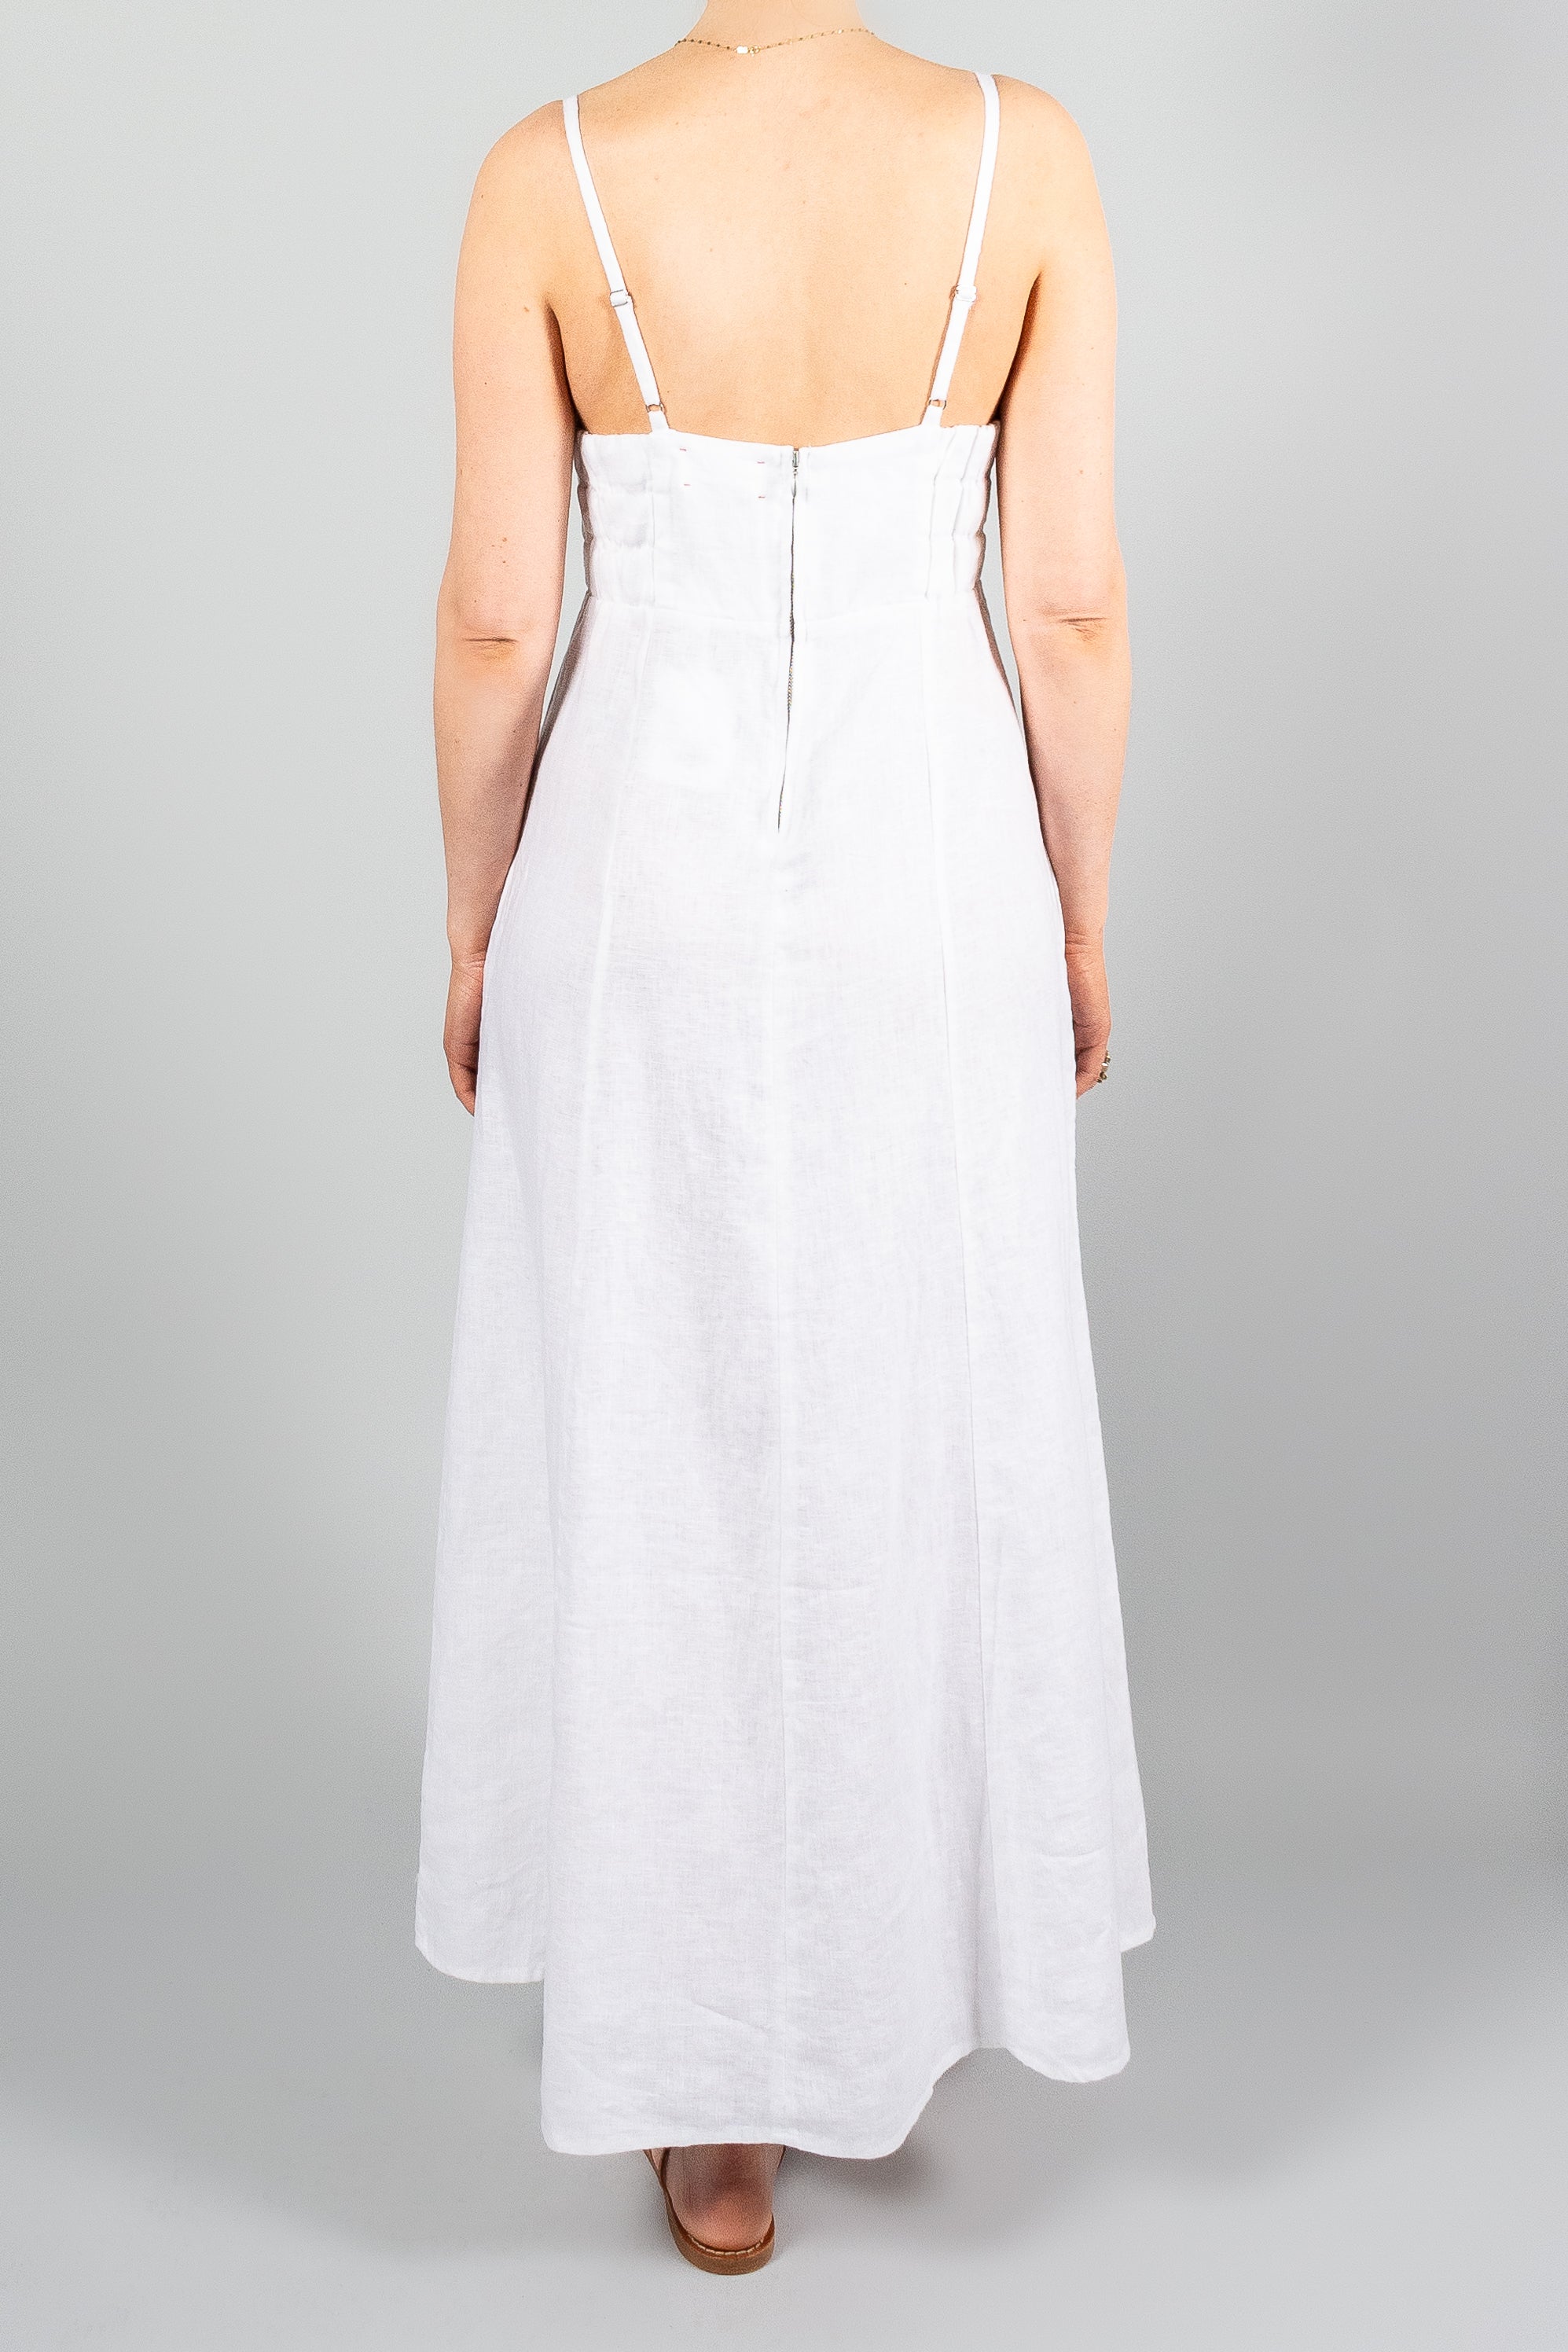 Xirena Daryl Dress-Dresses and Jumpsuits-Misch-Boutique-Vancouver-Canada-misch.ca